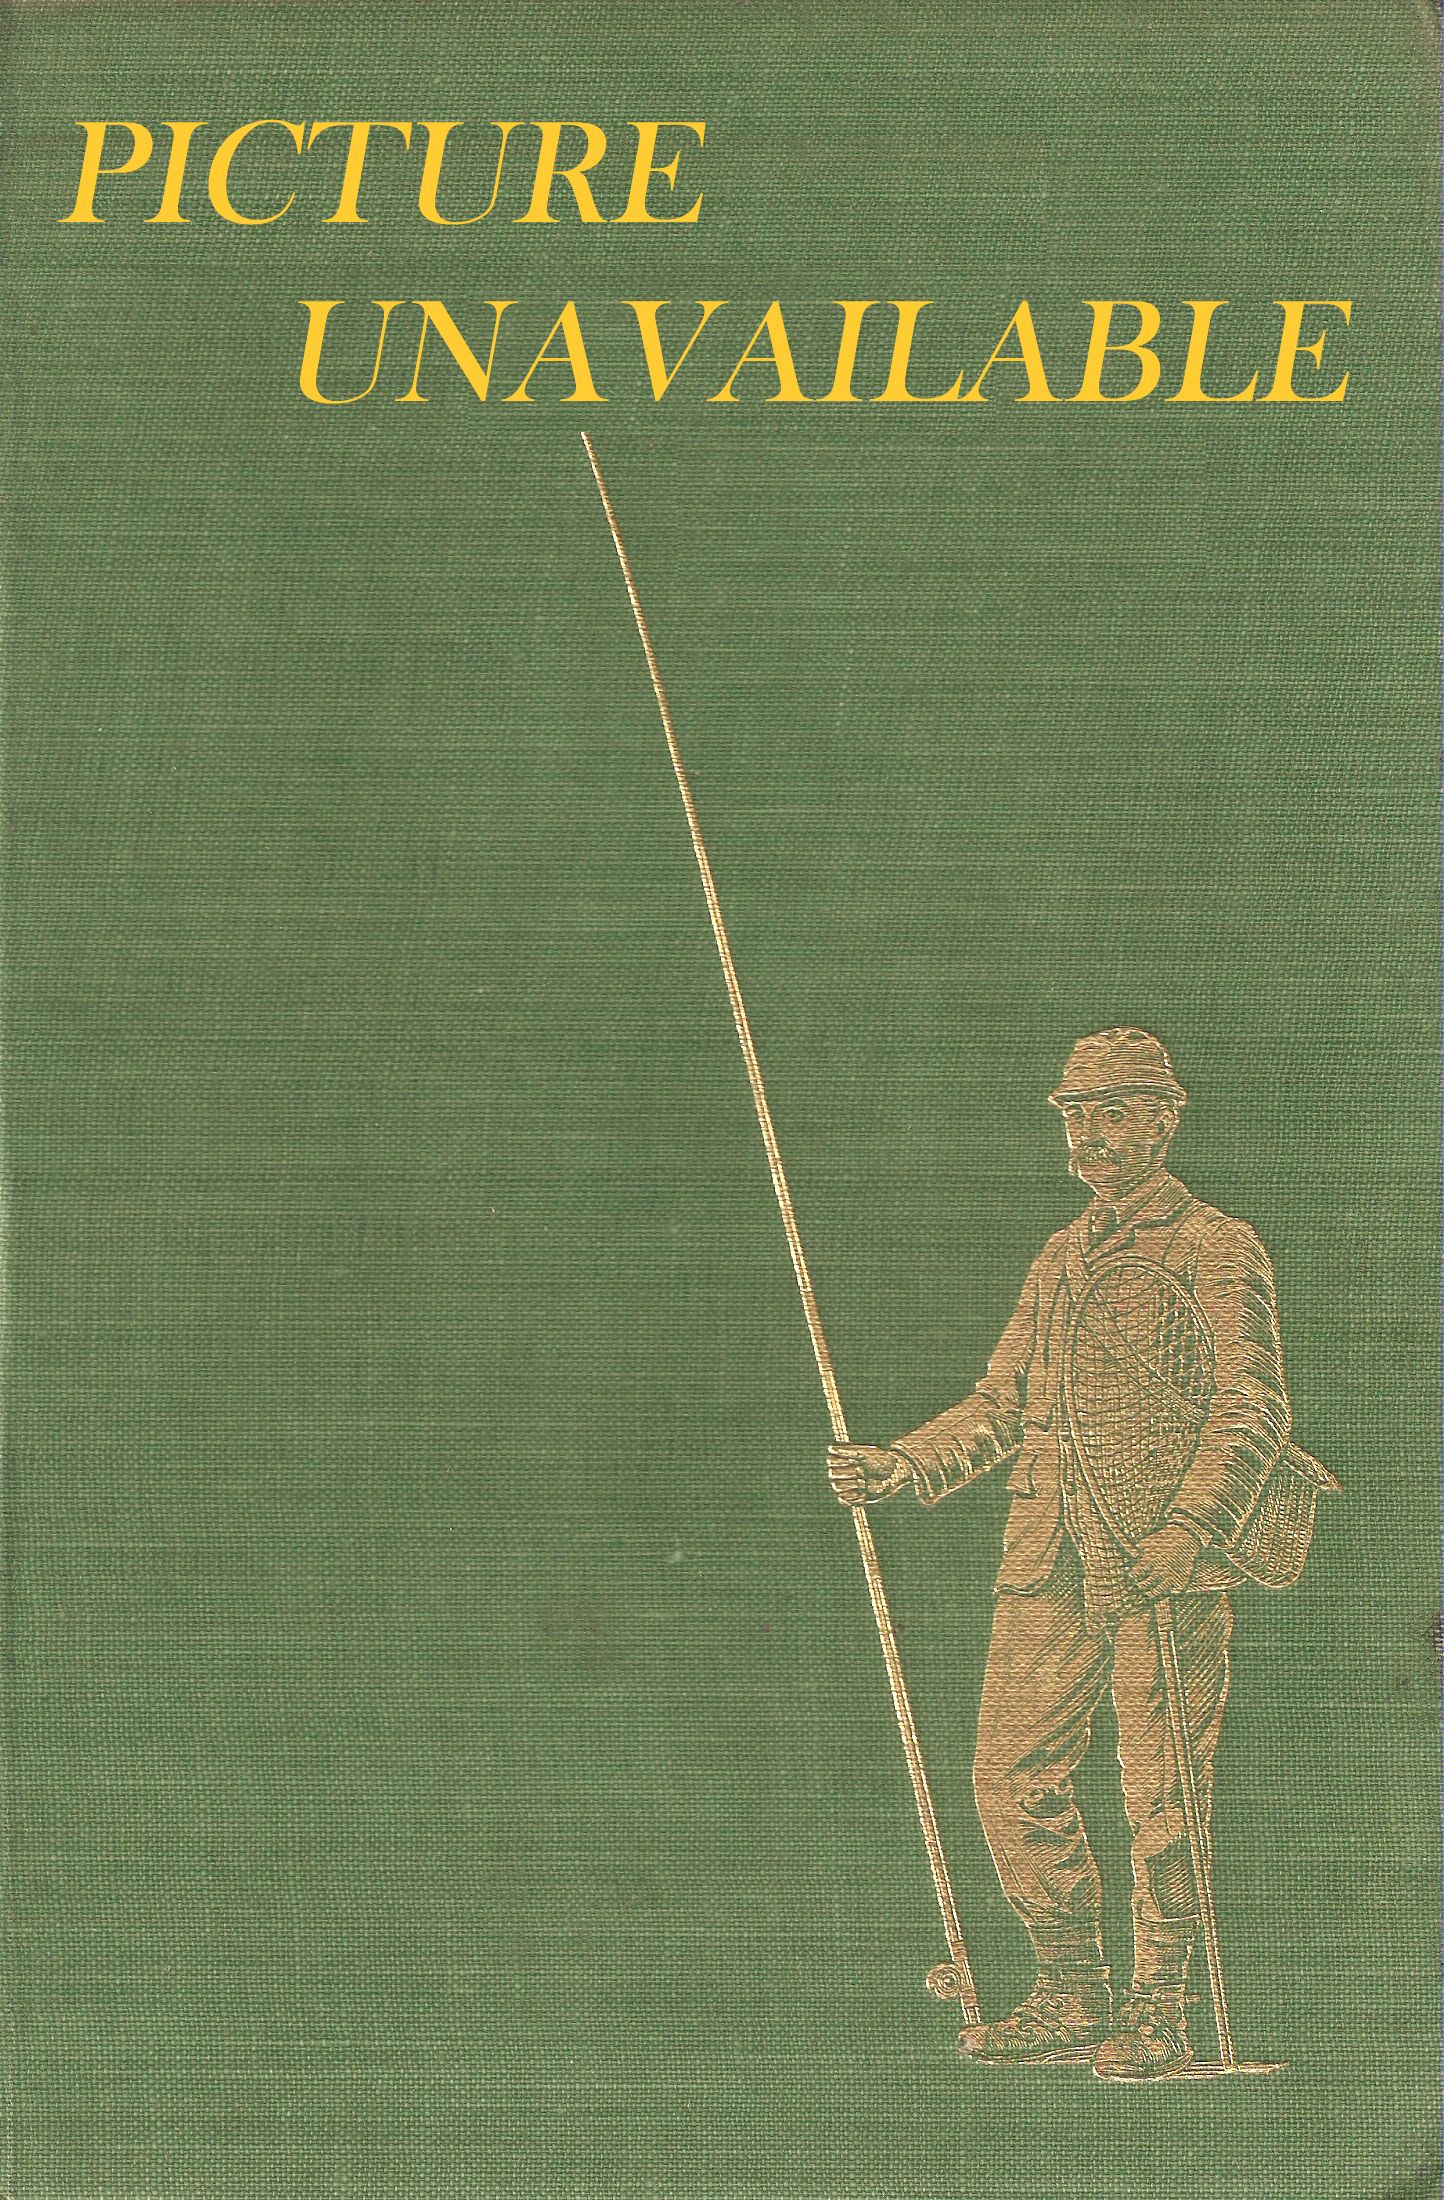 GAME FOR THE SPORTING RIFLE. By Henry Tegner, M.A.